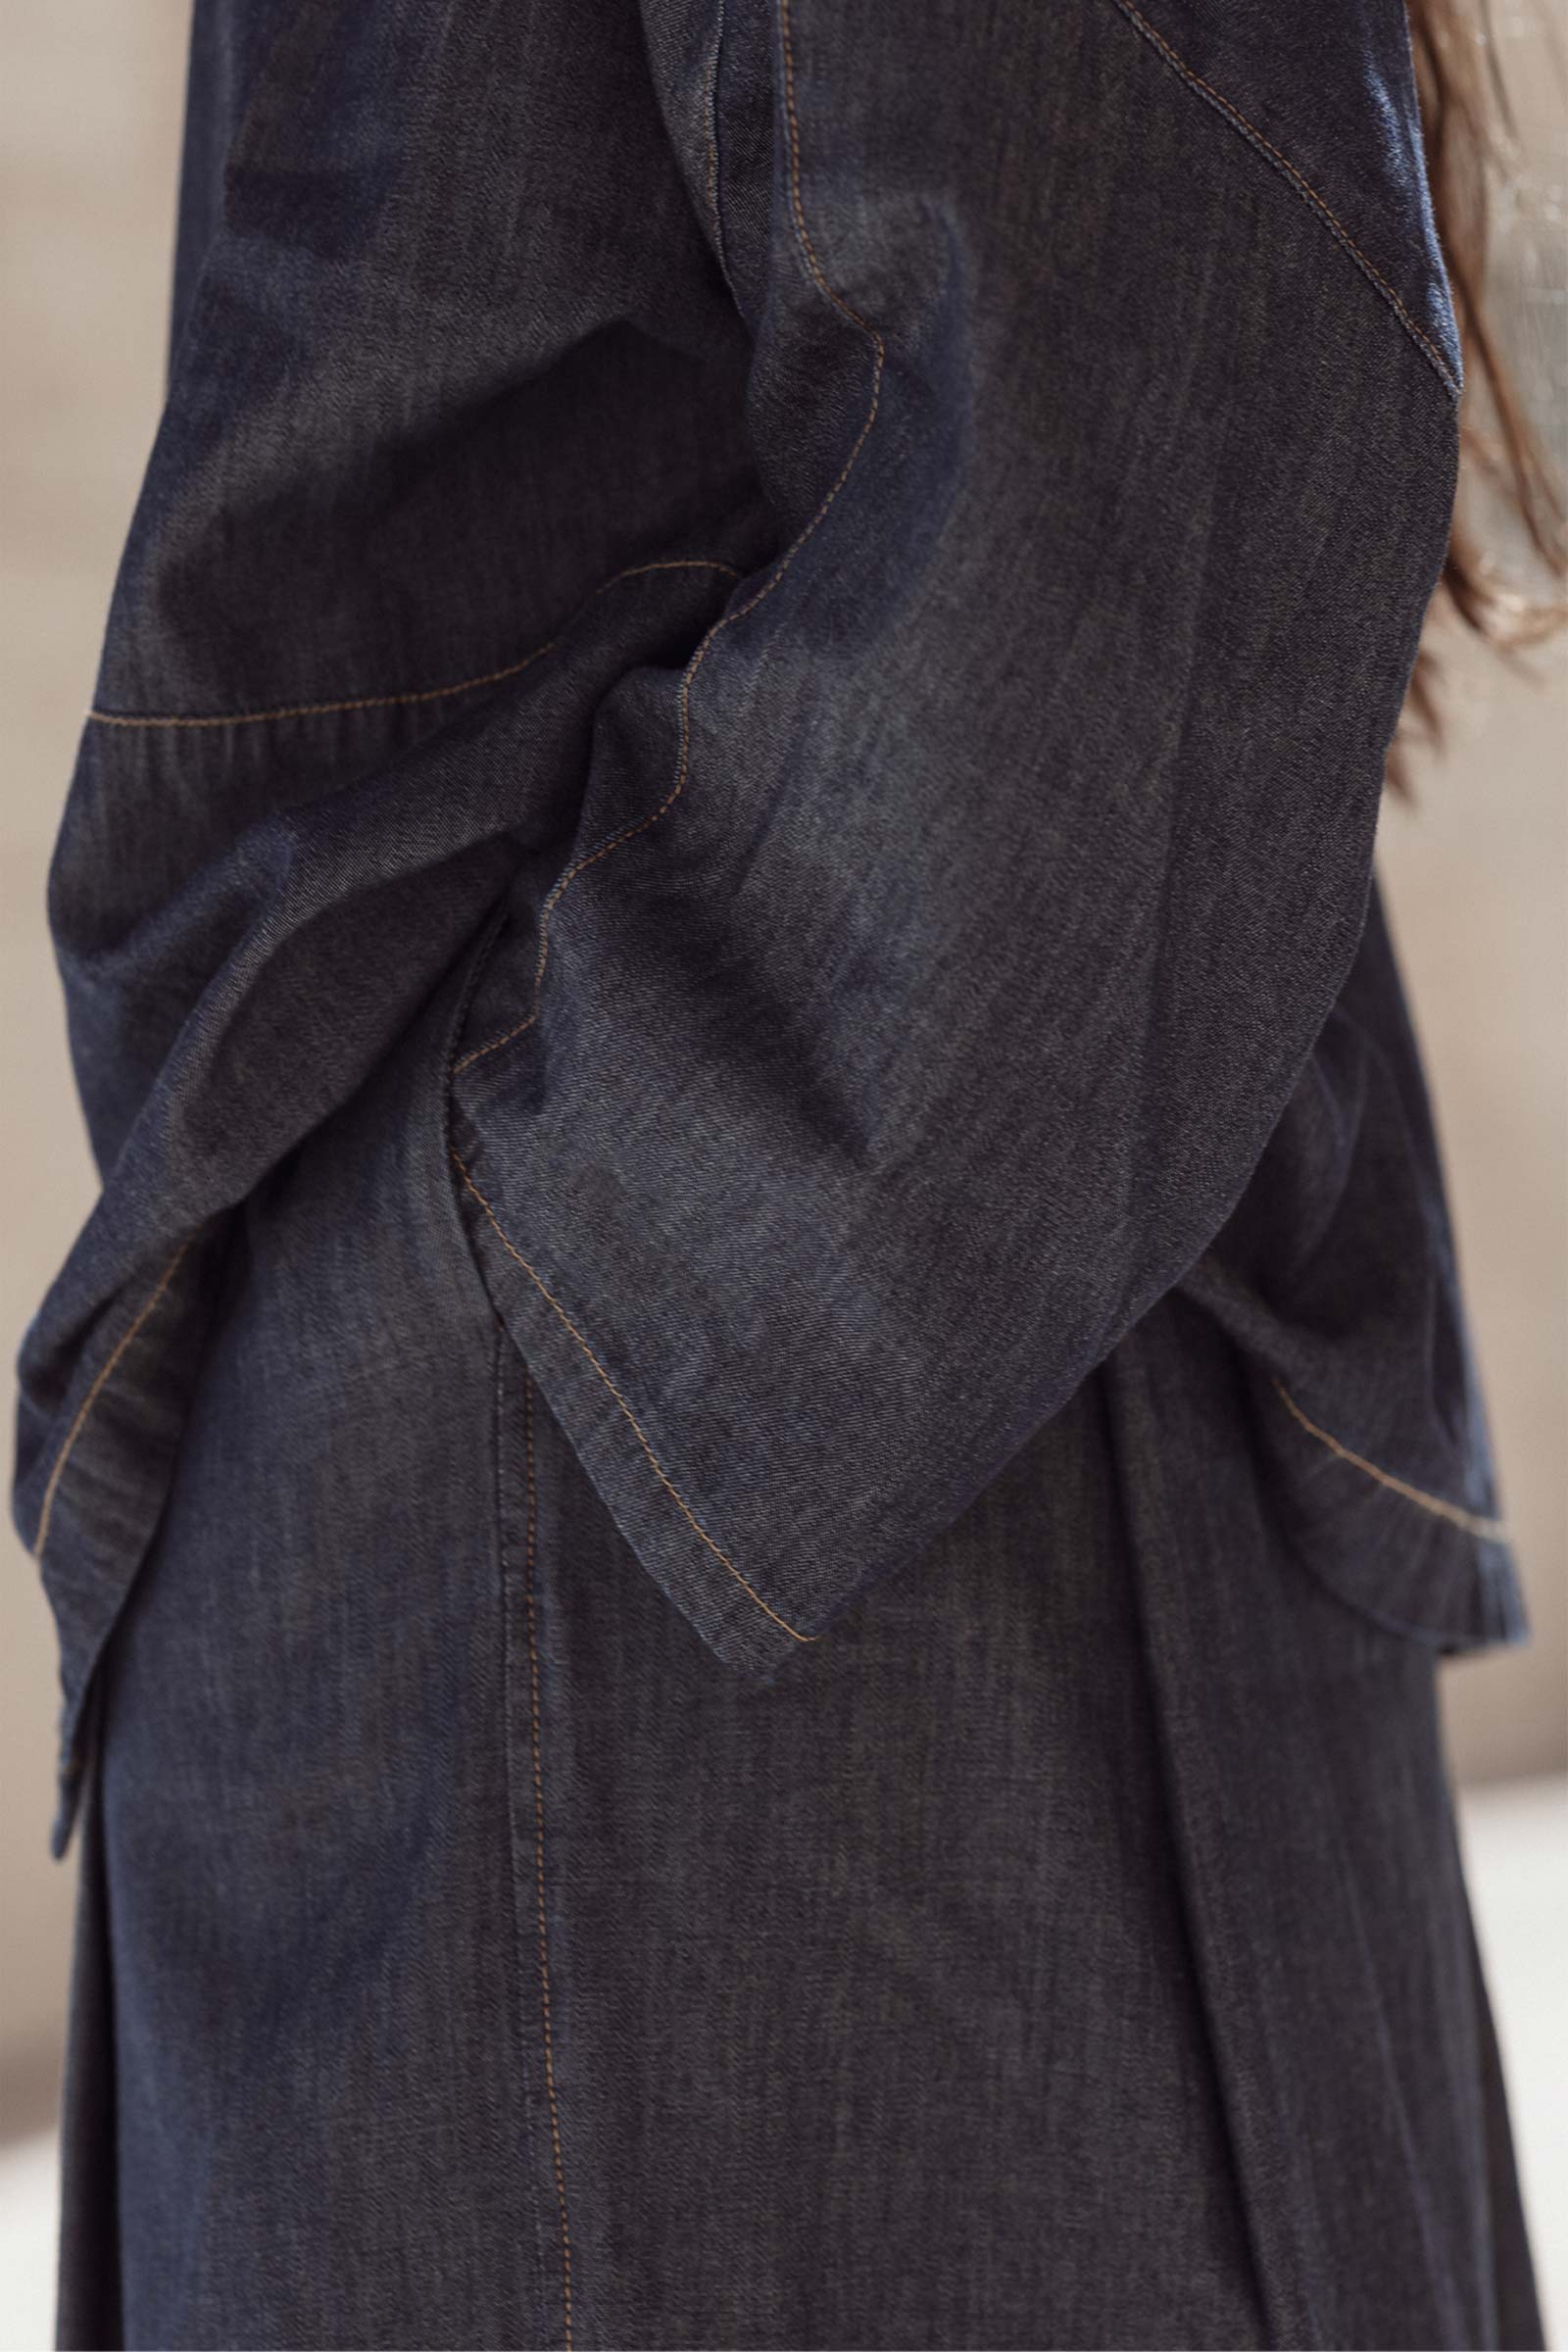 Close up details of 10 to 10 denim trousers and shirt